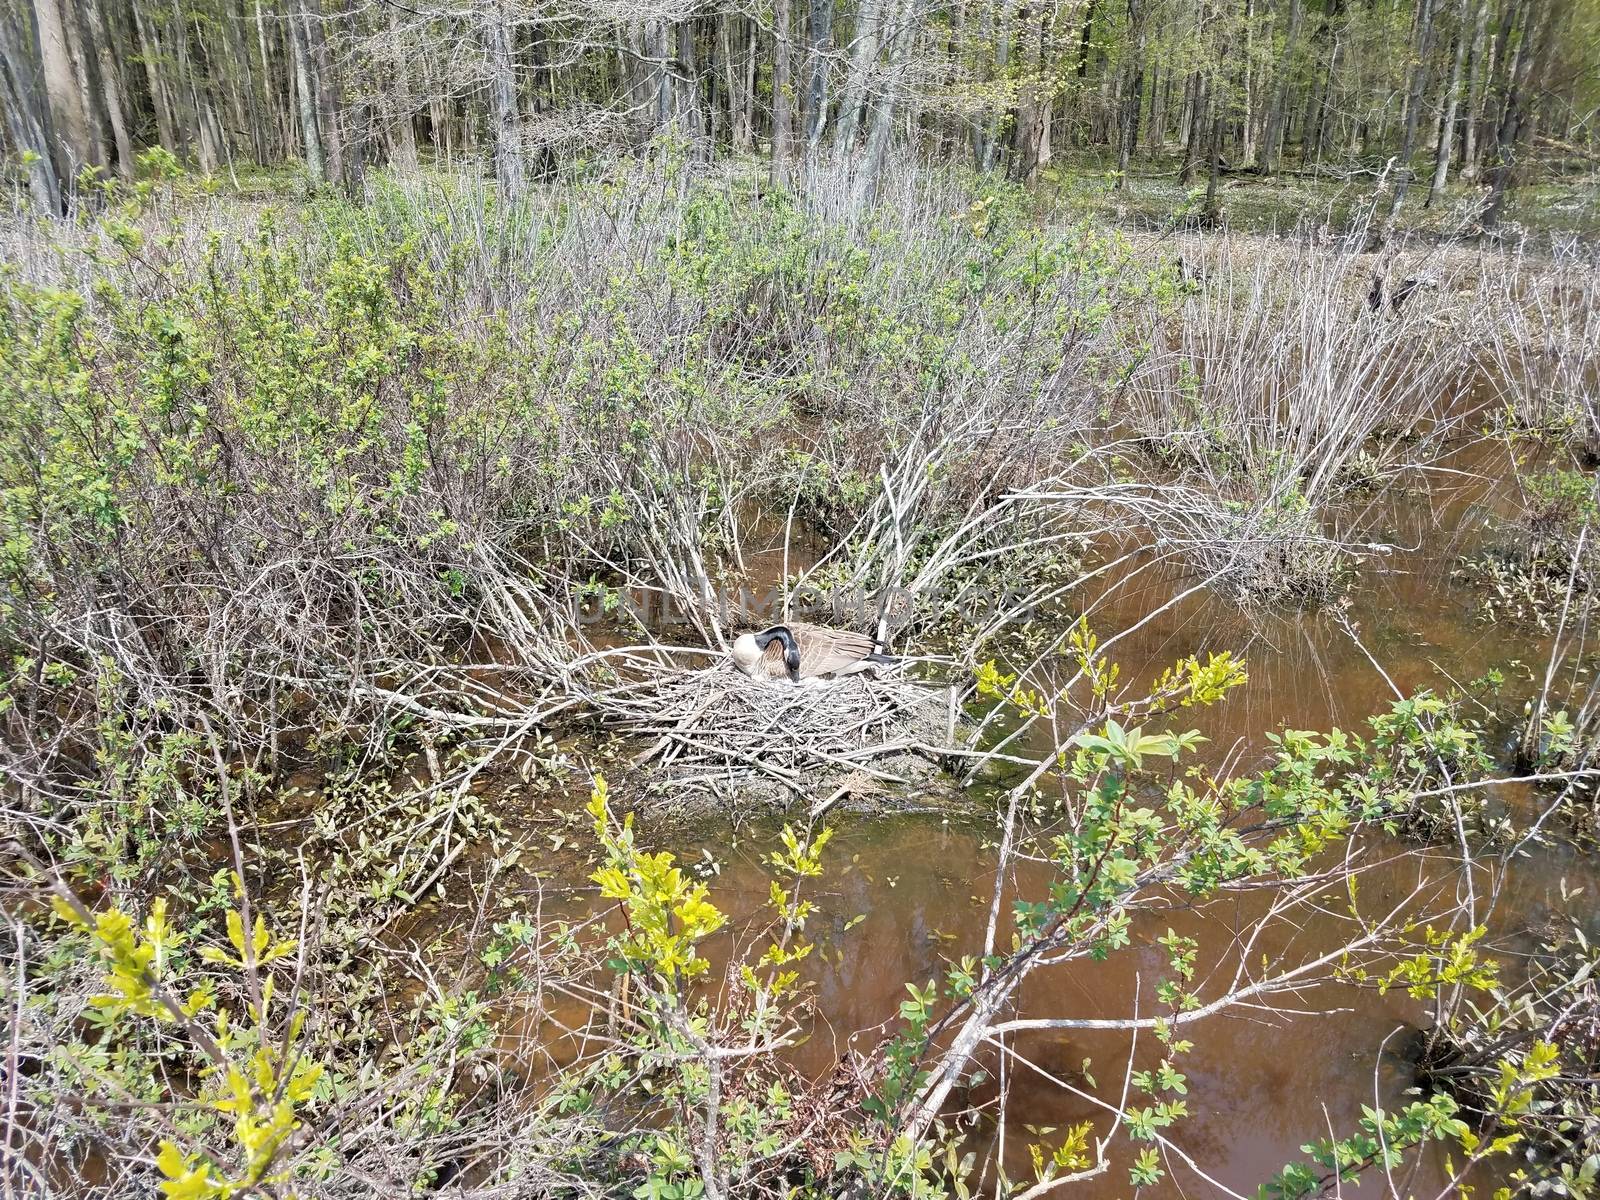 goose on a nest with plants in a wetland or marsh by stockphotofan1